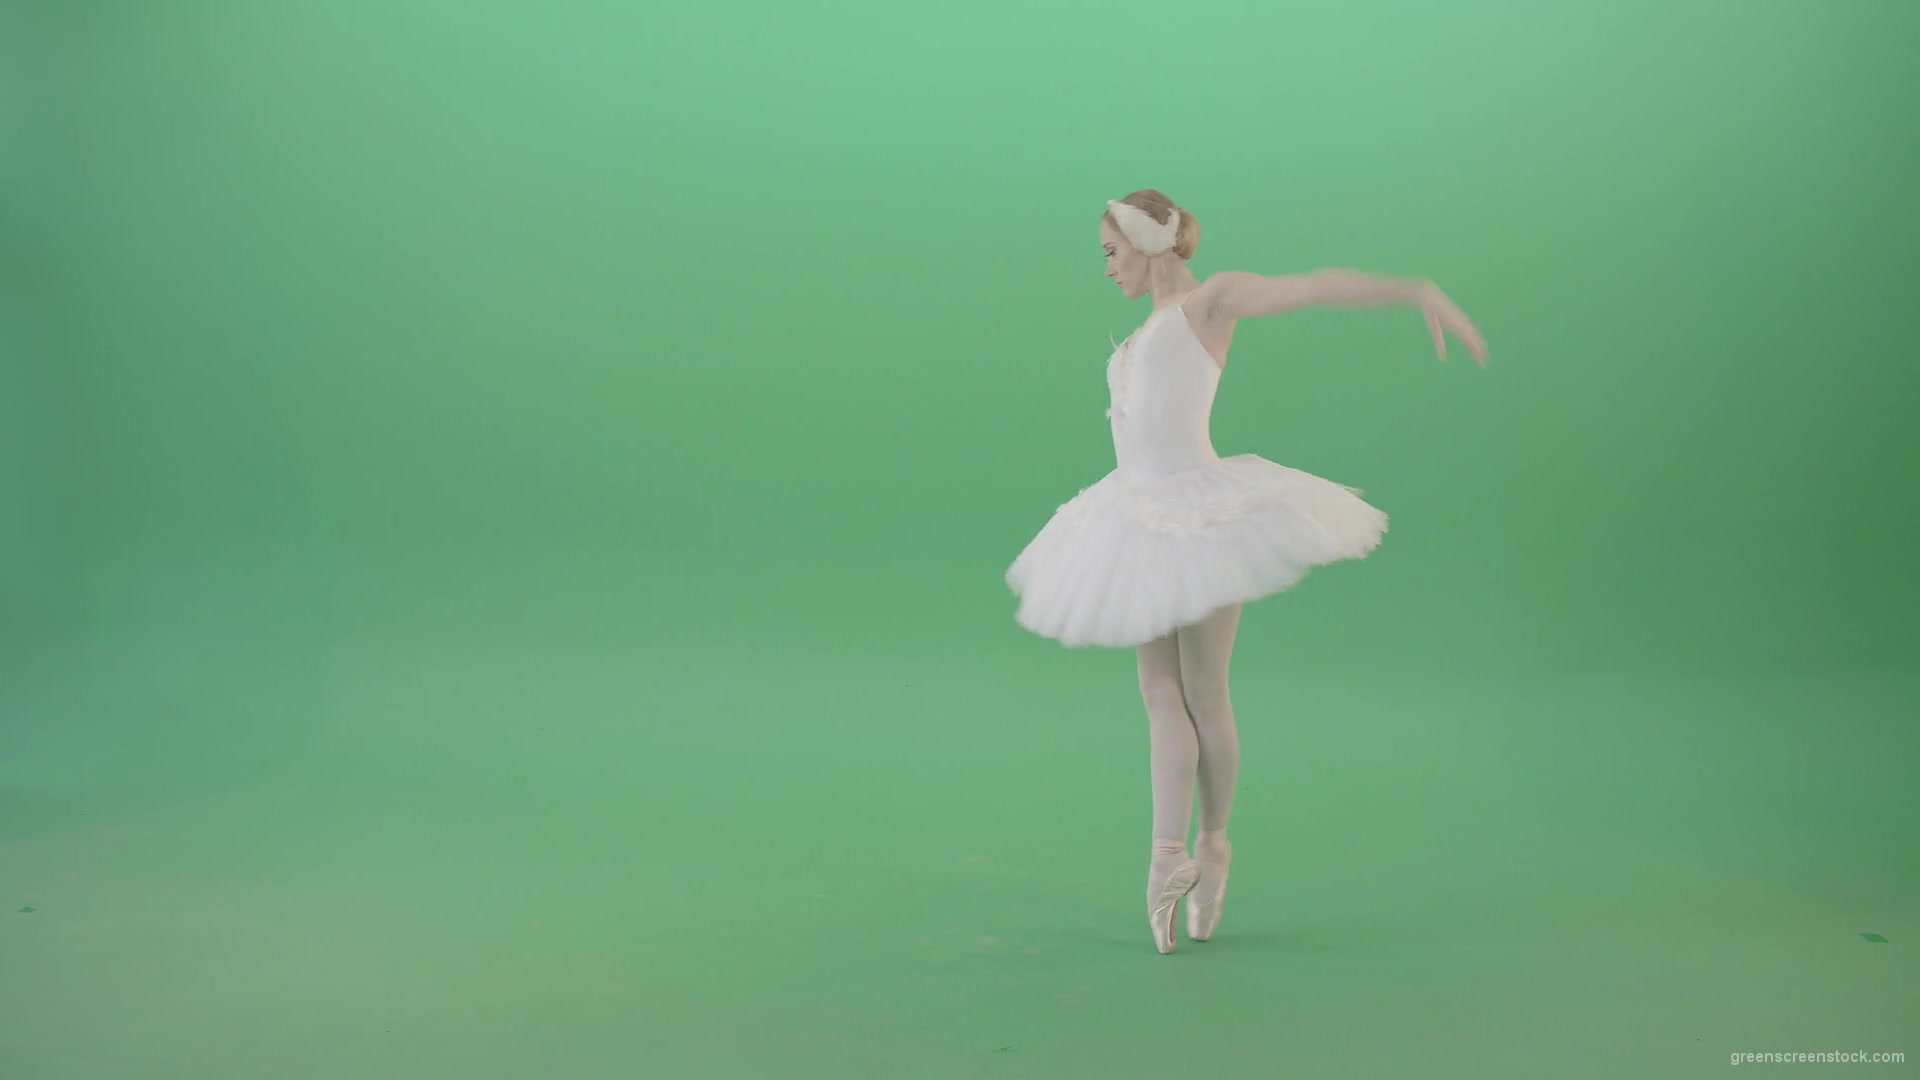 Luxury-ballet-girl-ballerina-flying-in-the-sky-and-waving-hands-on-green-screen-4K-Video-Footage-1920_005 Green Screen Stock